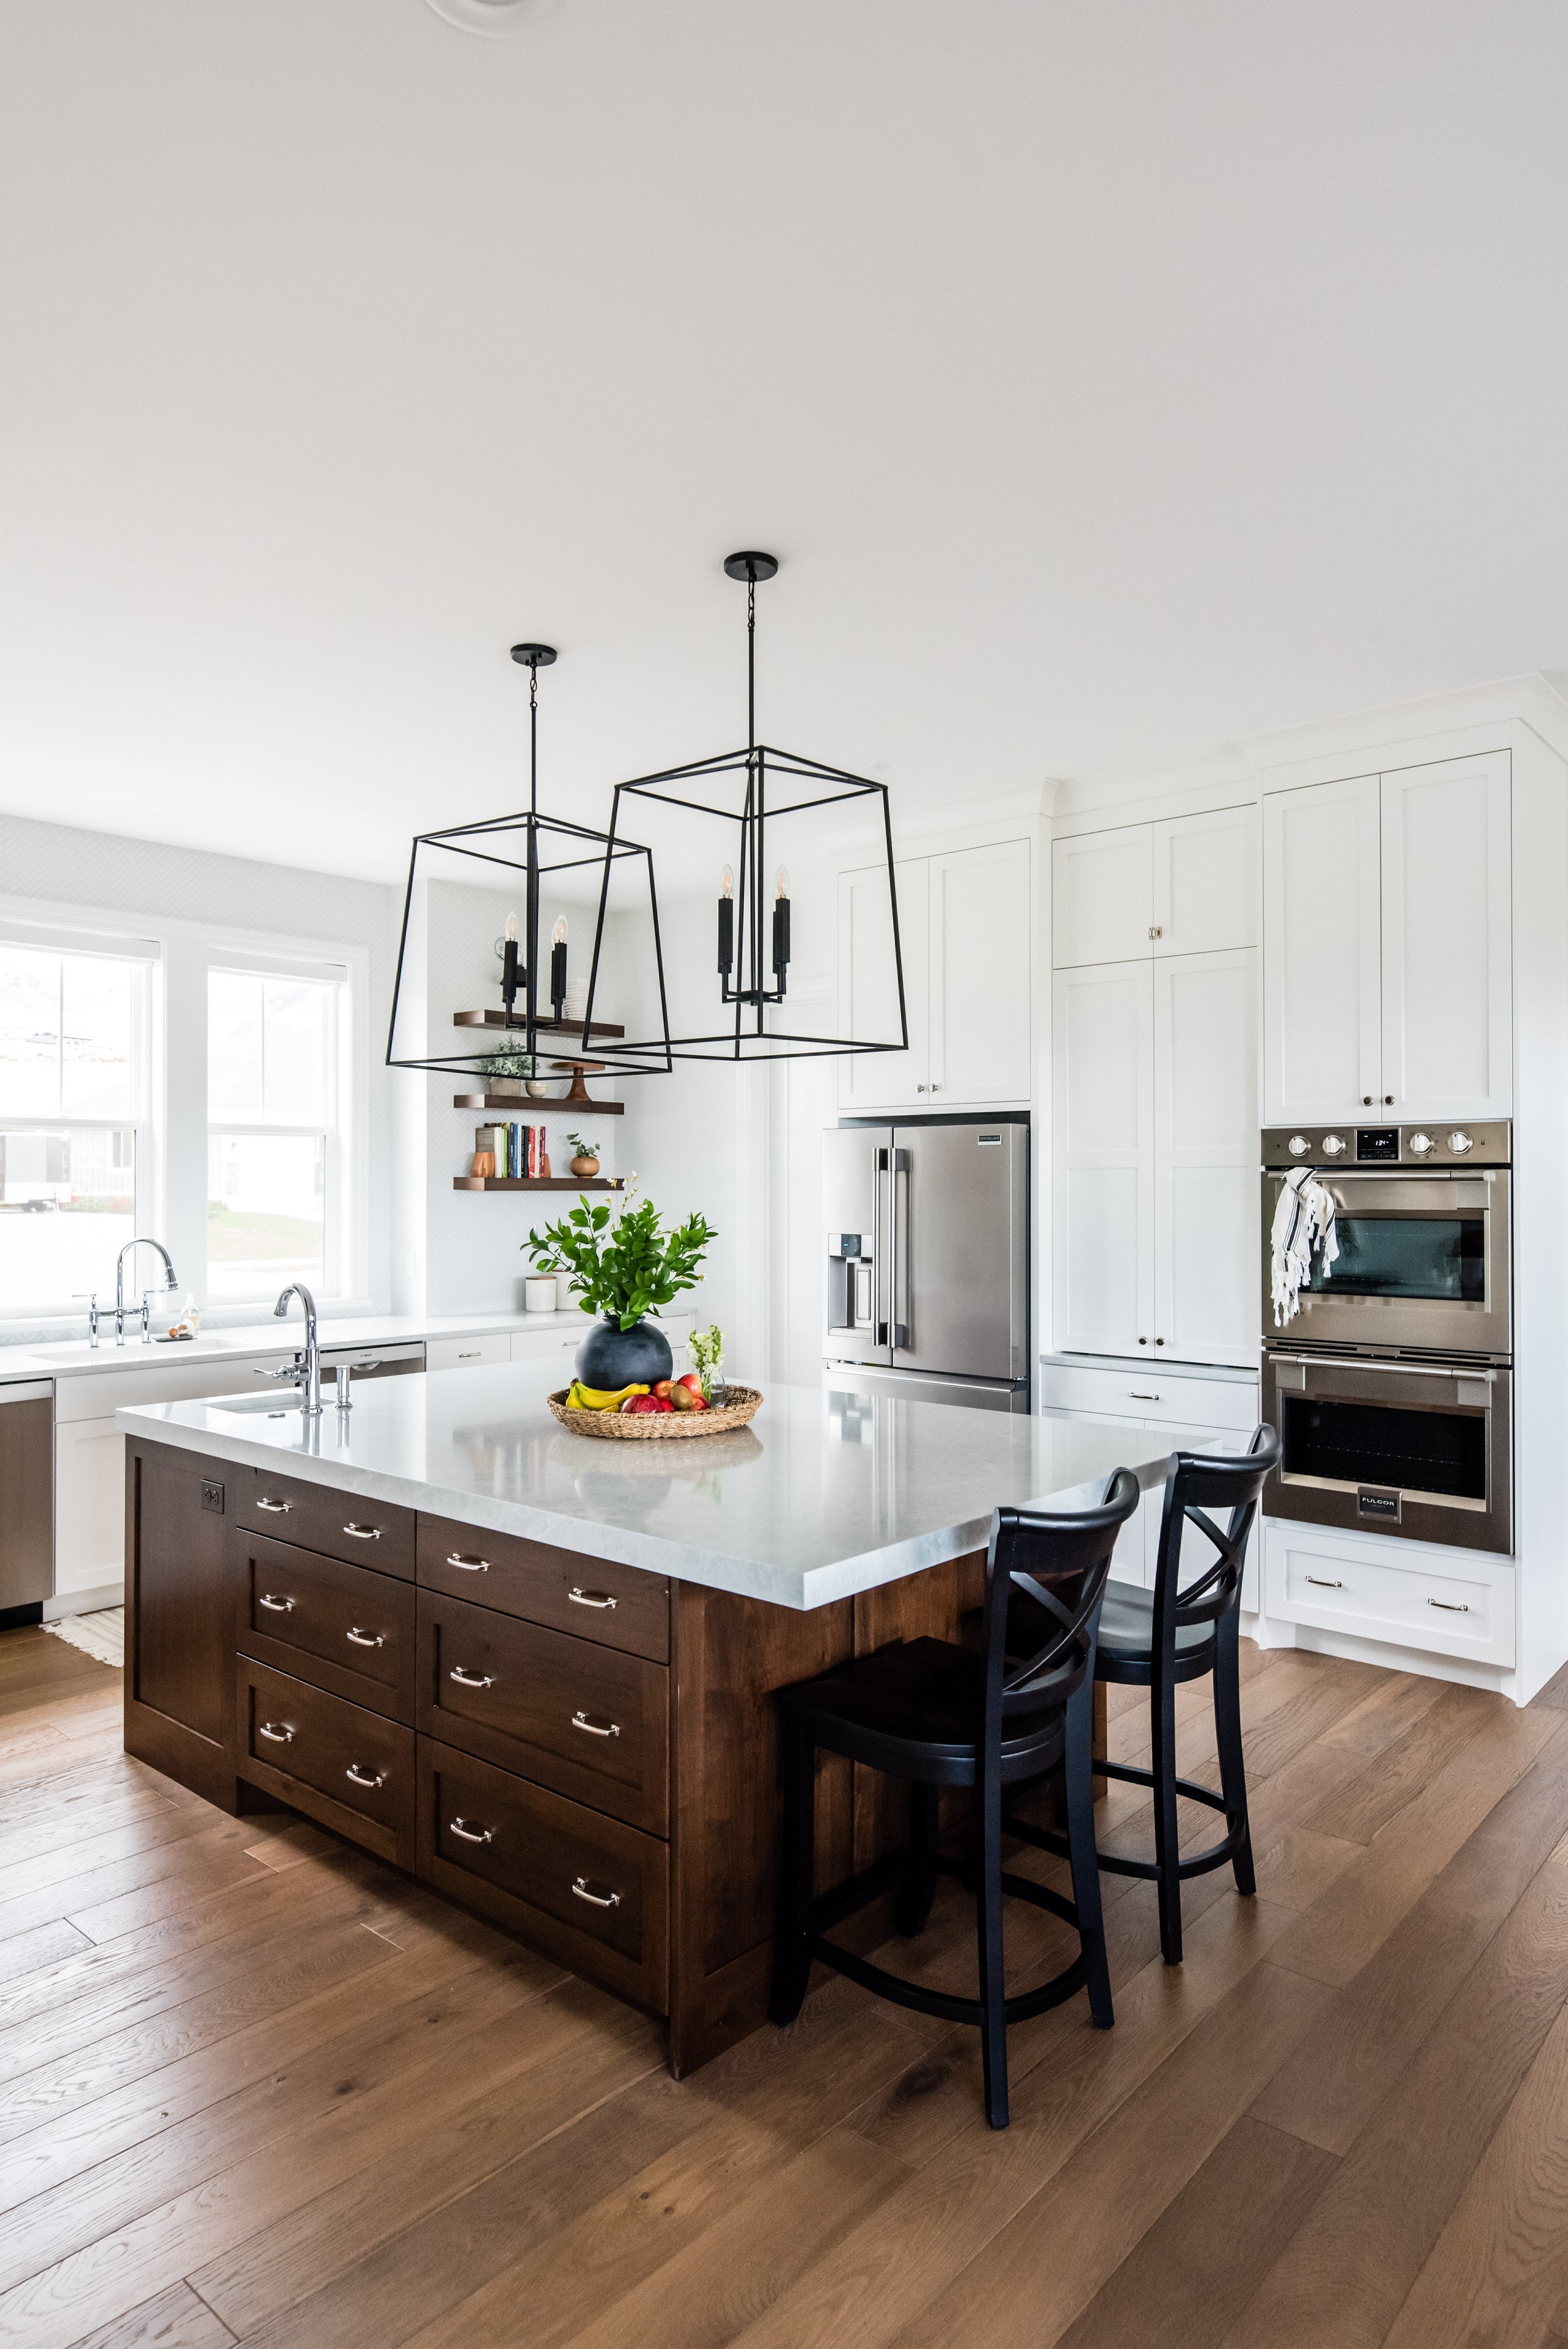  Picking out the right lighting options for a kitchen in your new build in Logan, Utah, with Liz Powell Design  #InteriorDesigner #LizPowellDesign #InteriorDesignUtah #buildingahome #lightingoptions #dreamhome #interiors #newbuild #lightyourhome #nor